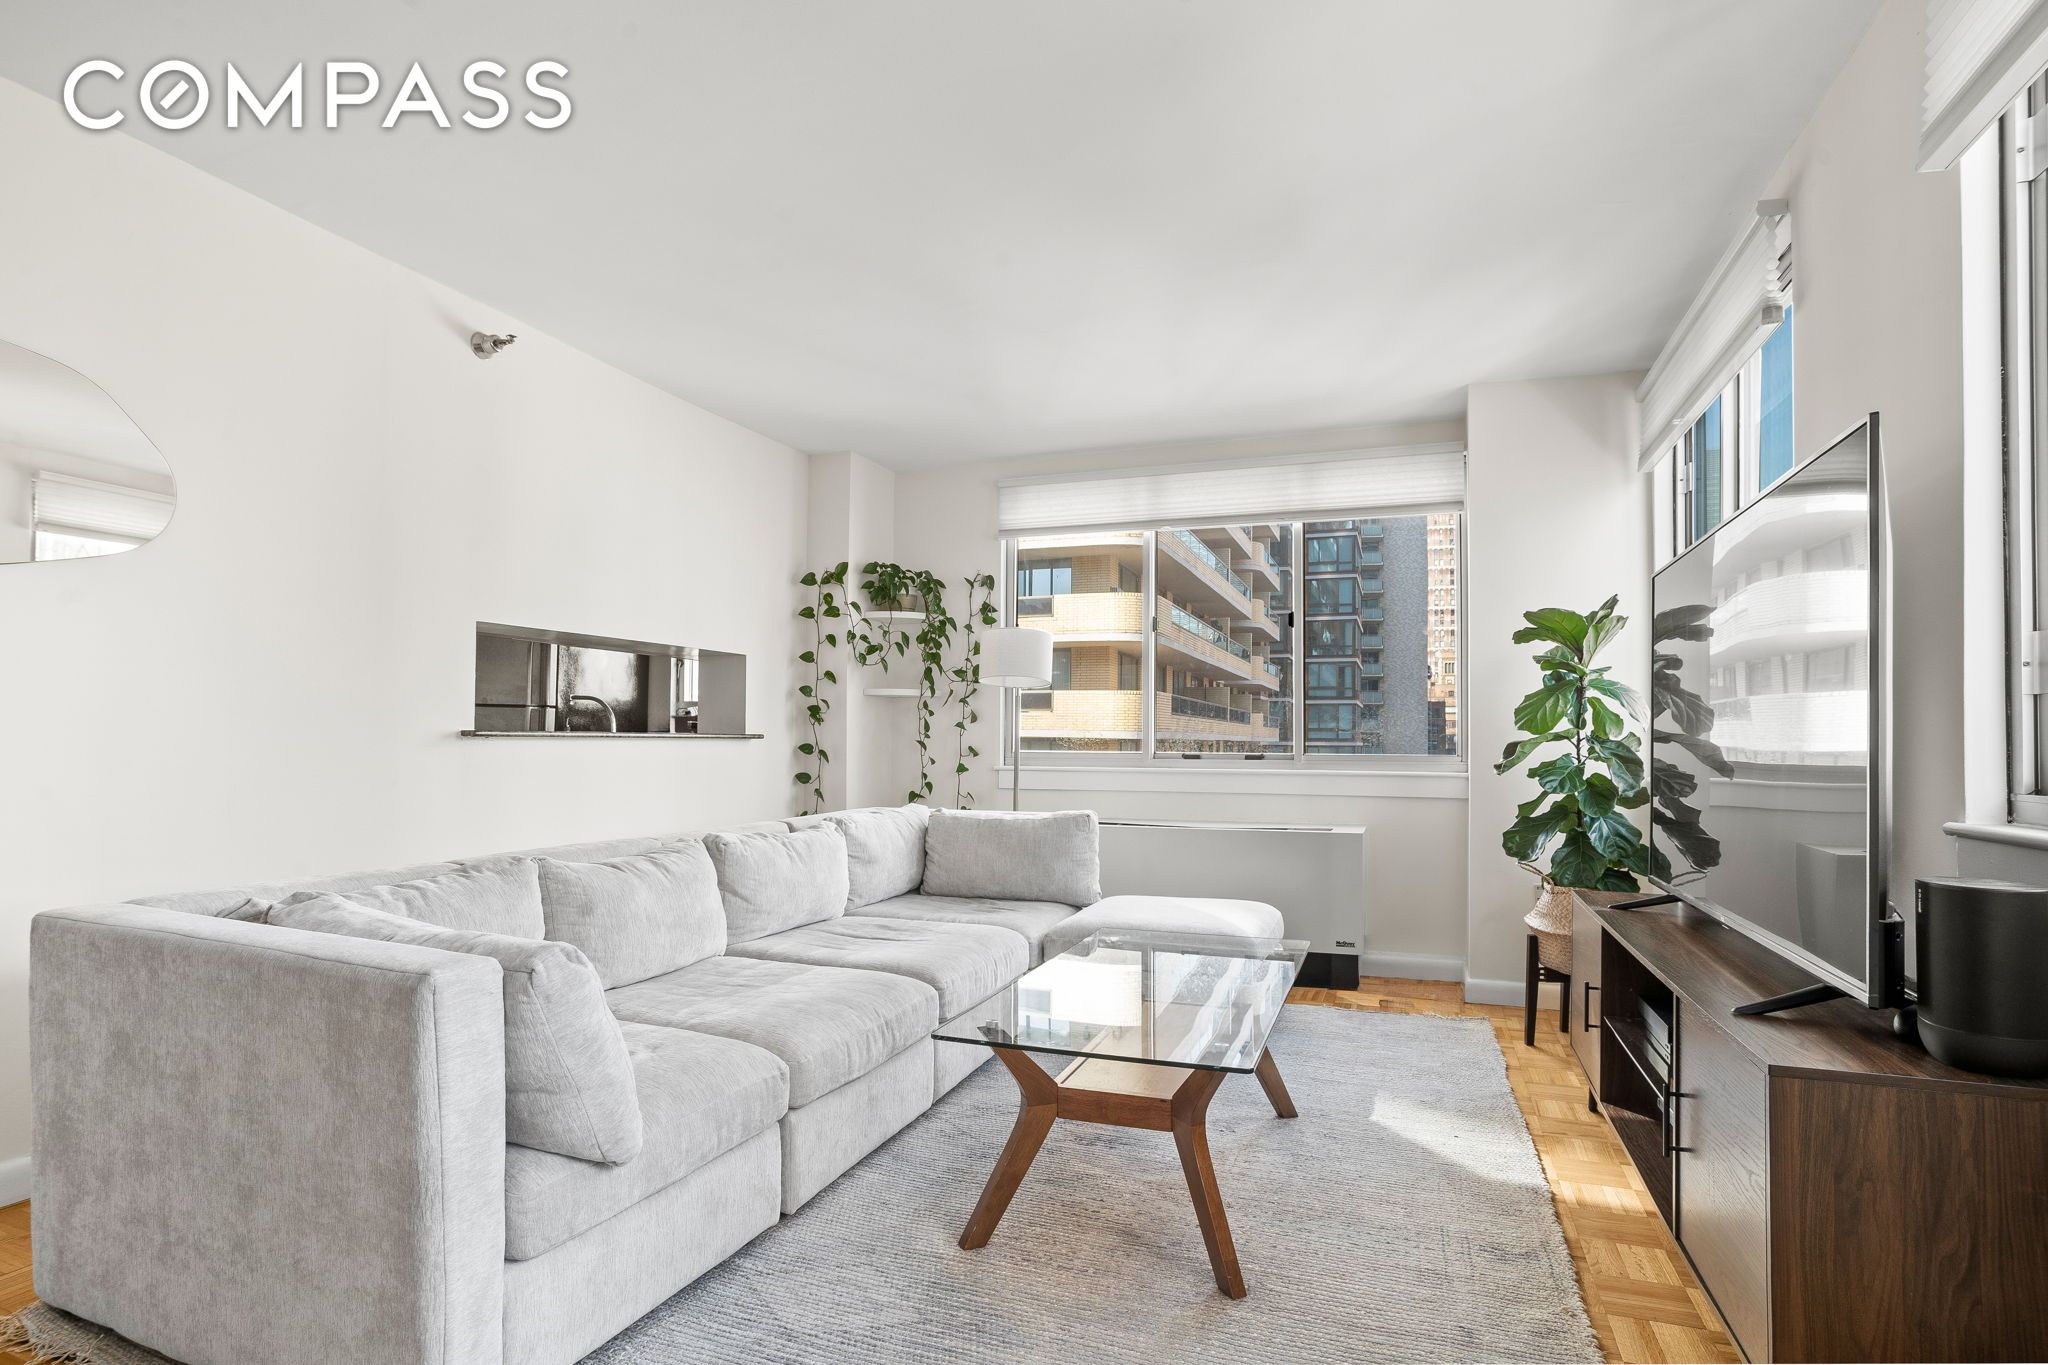 308 East 38th Street 14E, Murray Hill, Midtown East, NYC - 2 Bedrooms  

5 Rooms - 